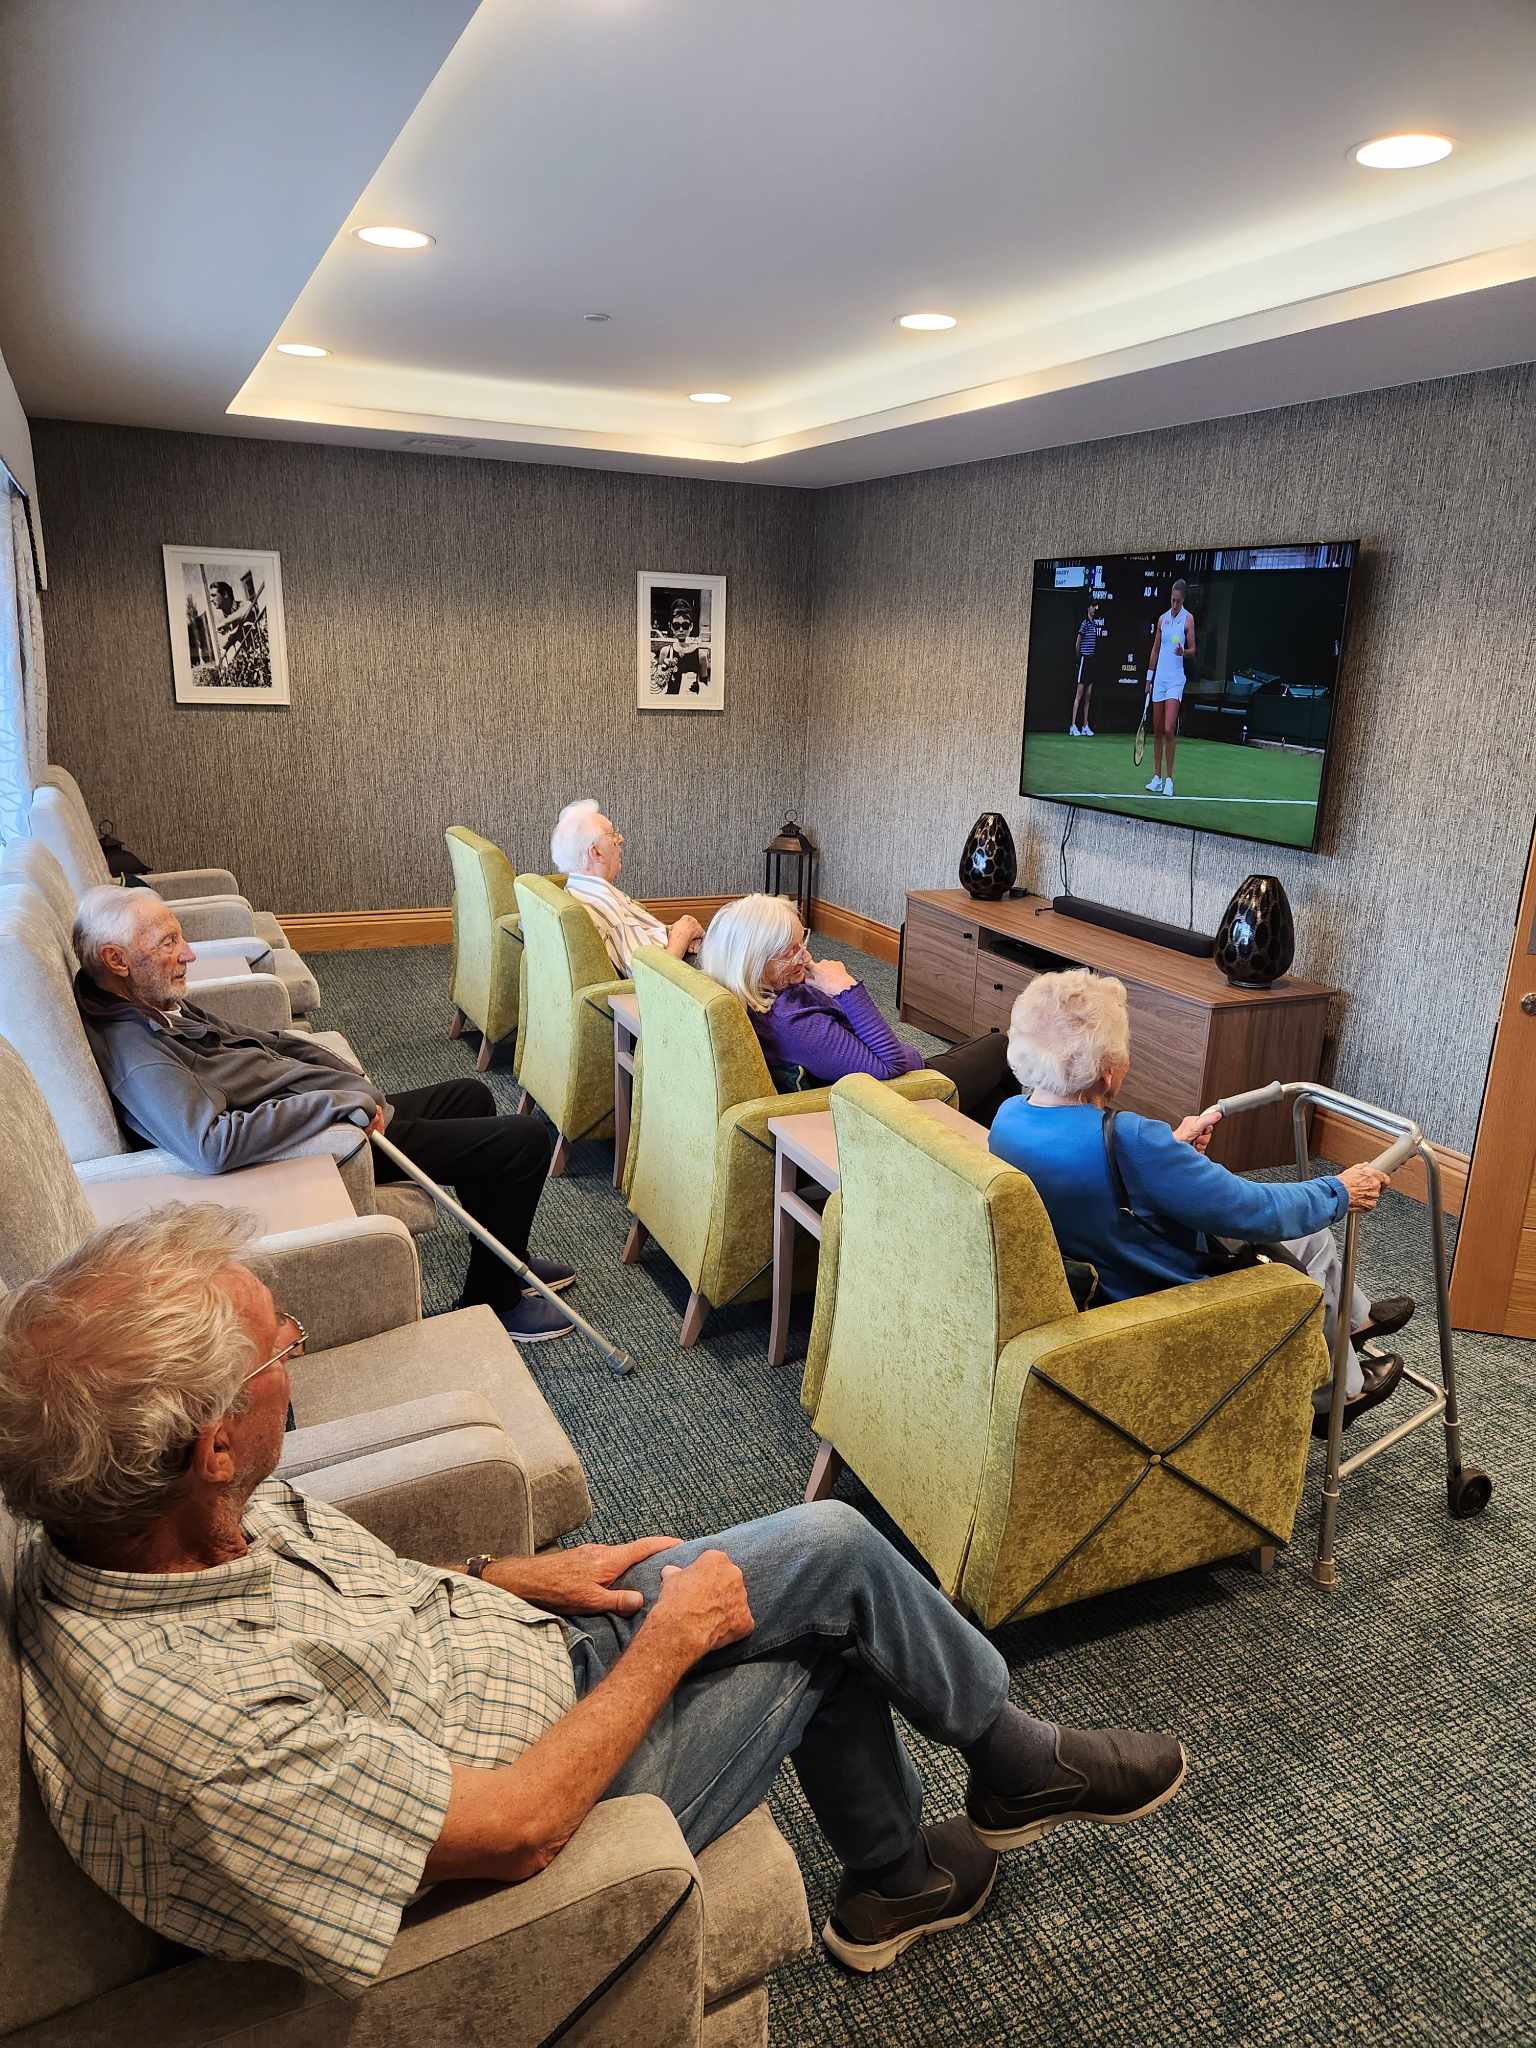 Two male residents in the back row armchairs. Three female residents in the front row green armchairs watching the tennis on the flatscreen TV.